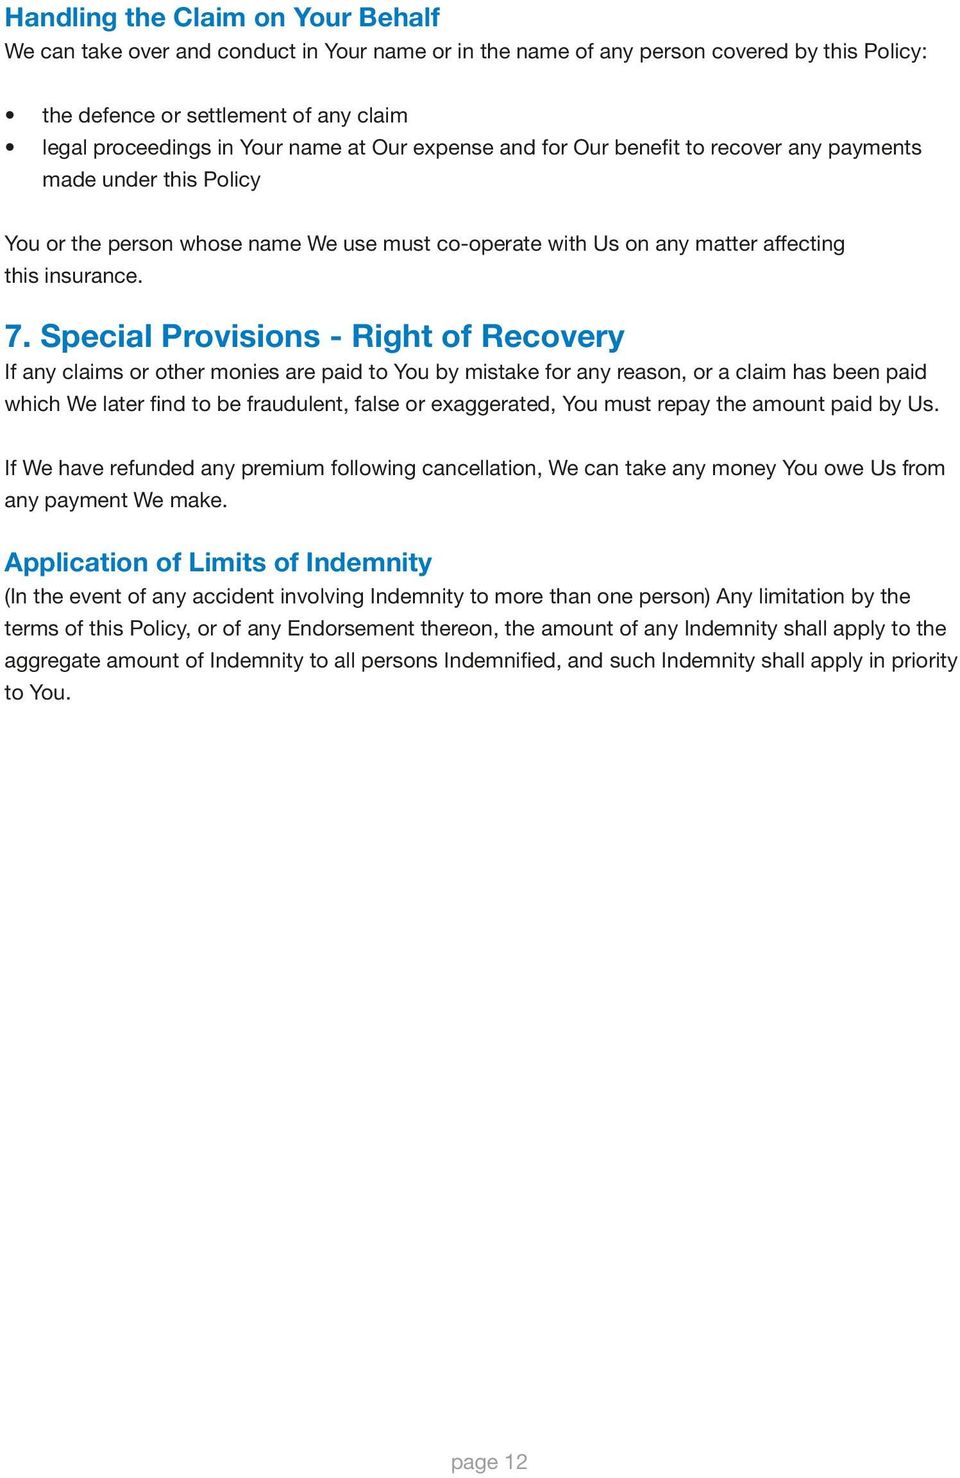 Special Provisions - Right of Recovery If any claims or other monies are paid to You by mistake for any reason, or a claim has been paid which We later find to be fraudulent, false or exaggerated,